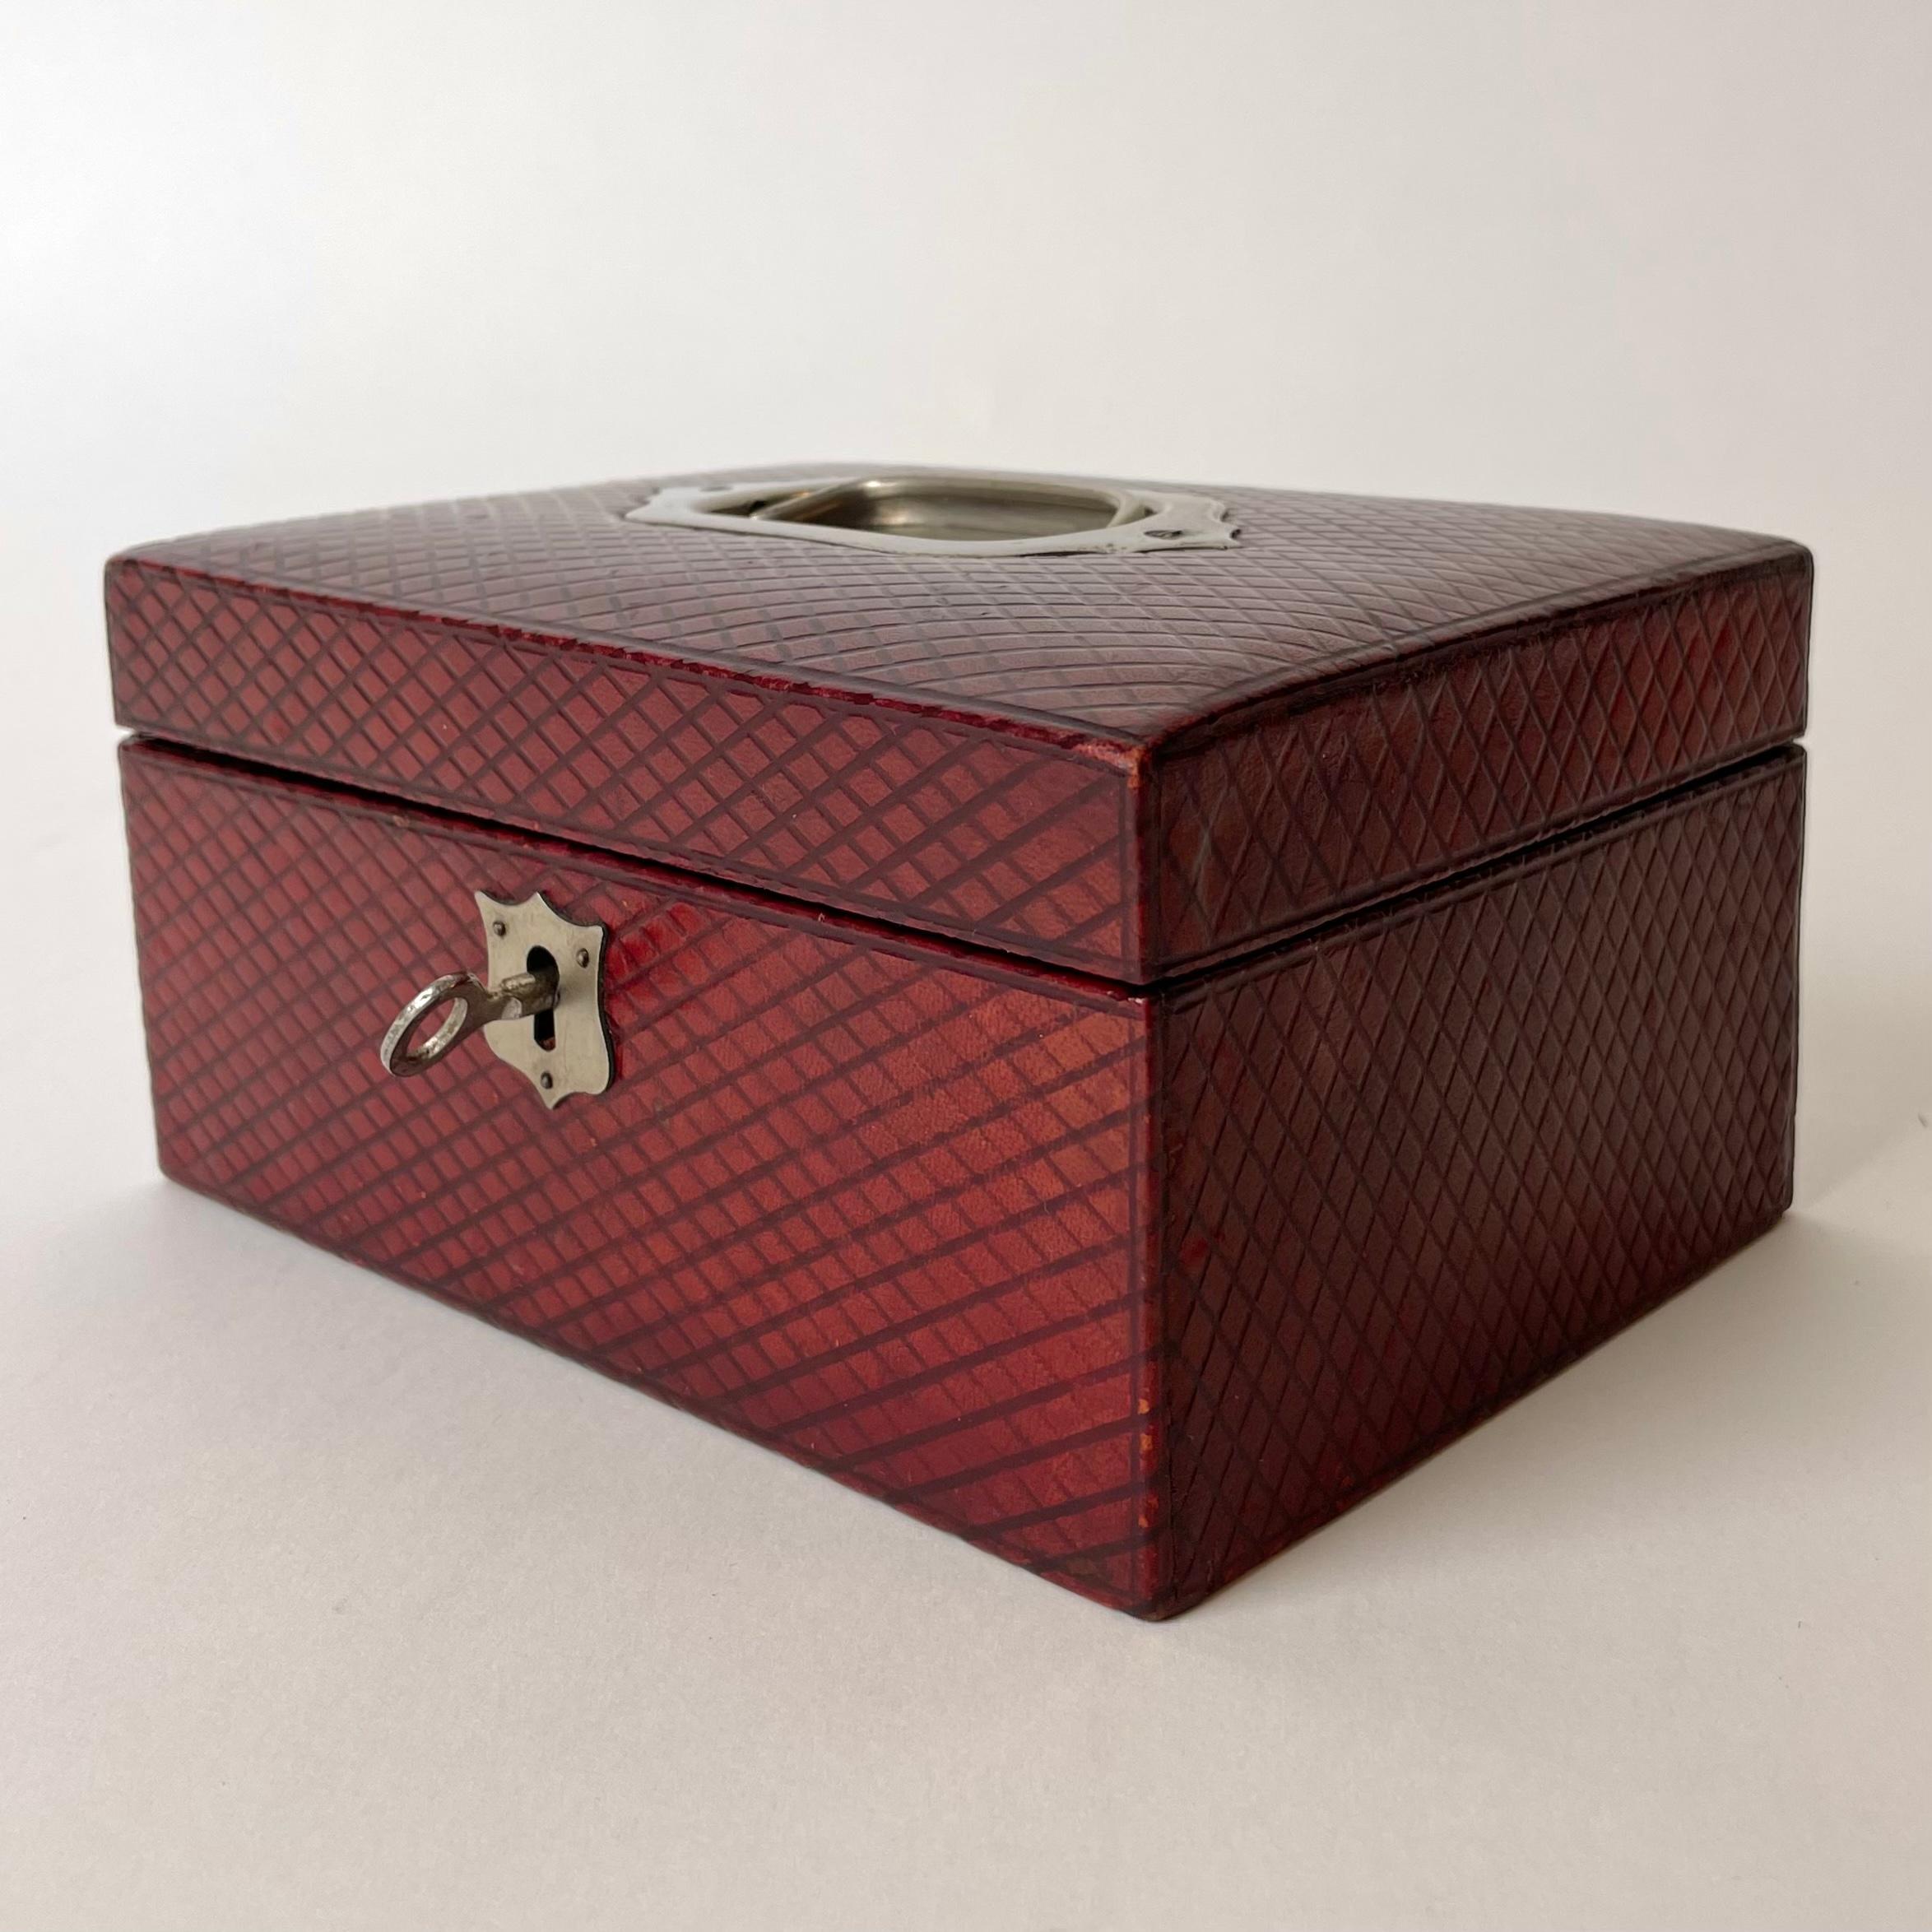 Beautiful Jewelery Box in red leather with an embossed check pattern. Details in nickel and with working lock and key. Probably made in England during the early 20th Century.

Wear consistent with age and use.